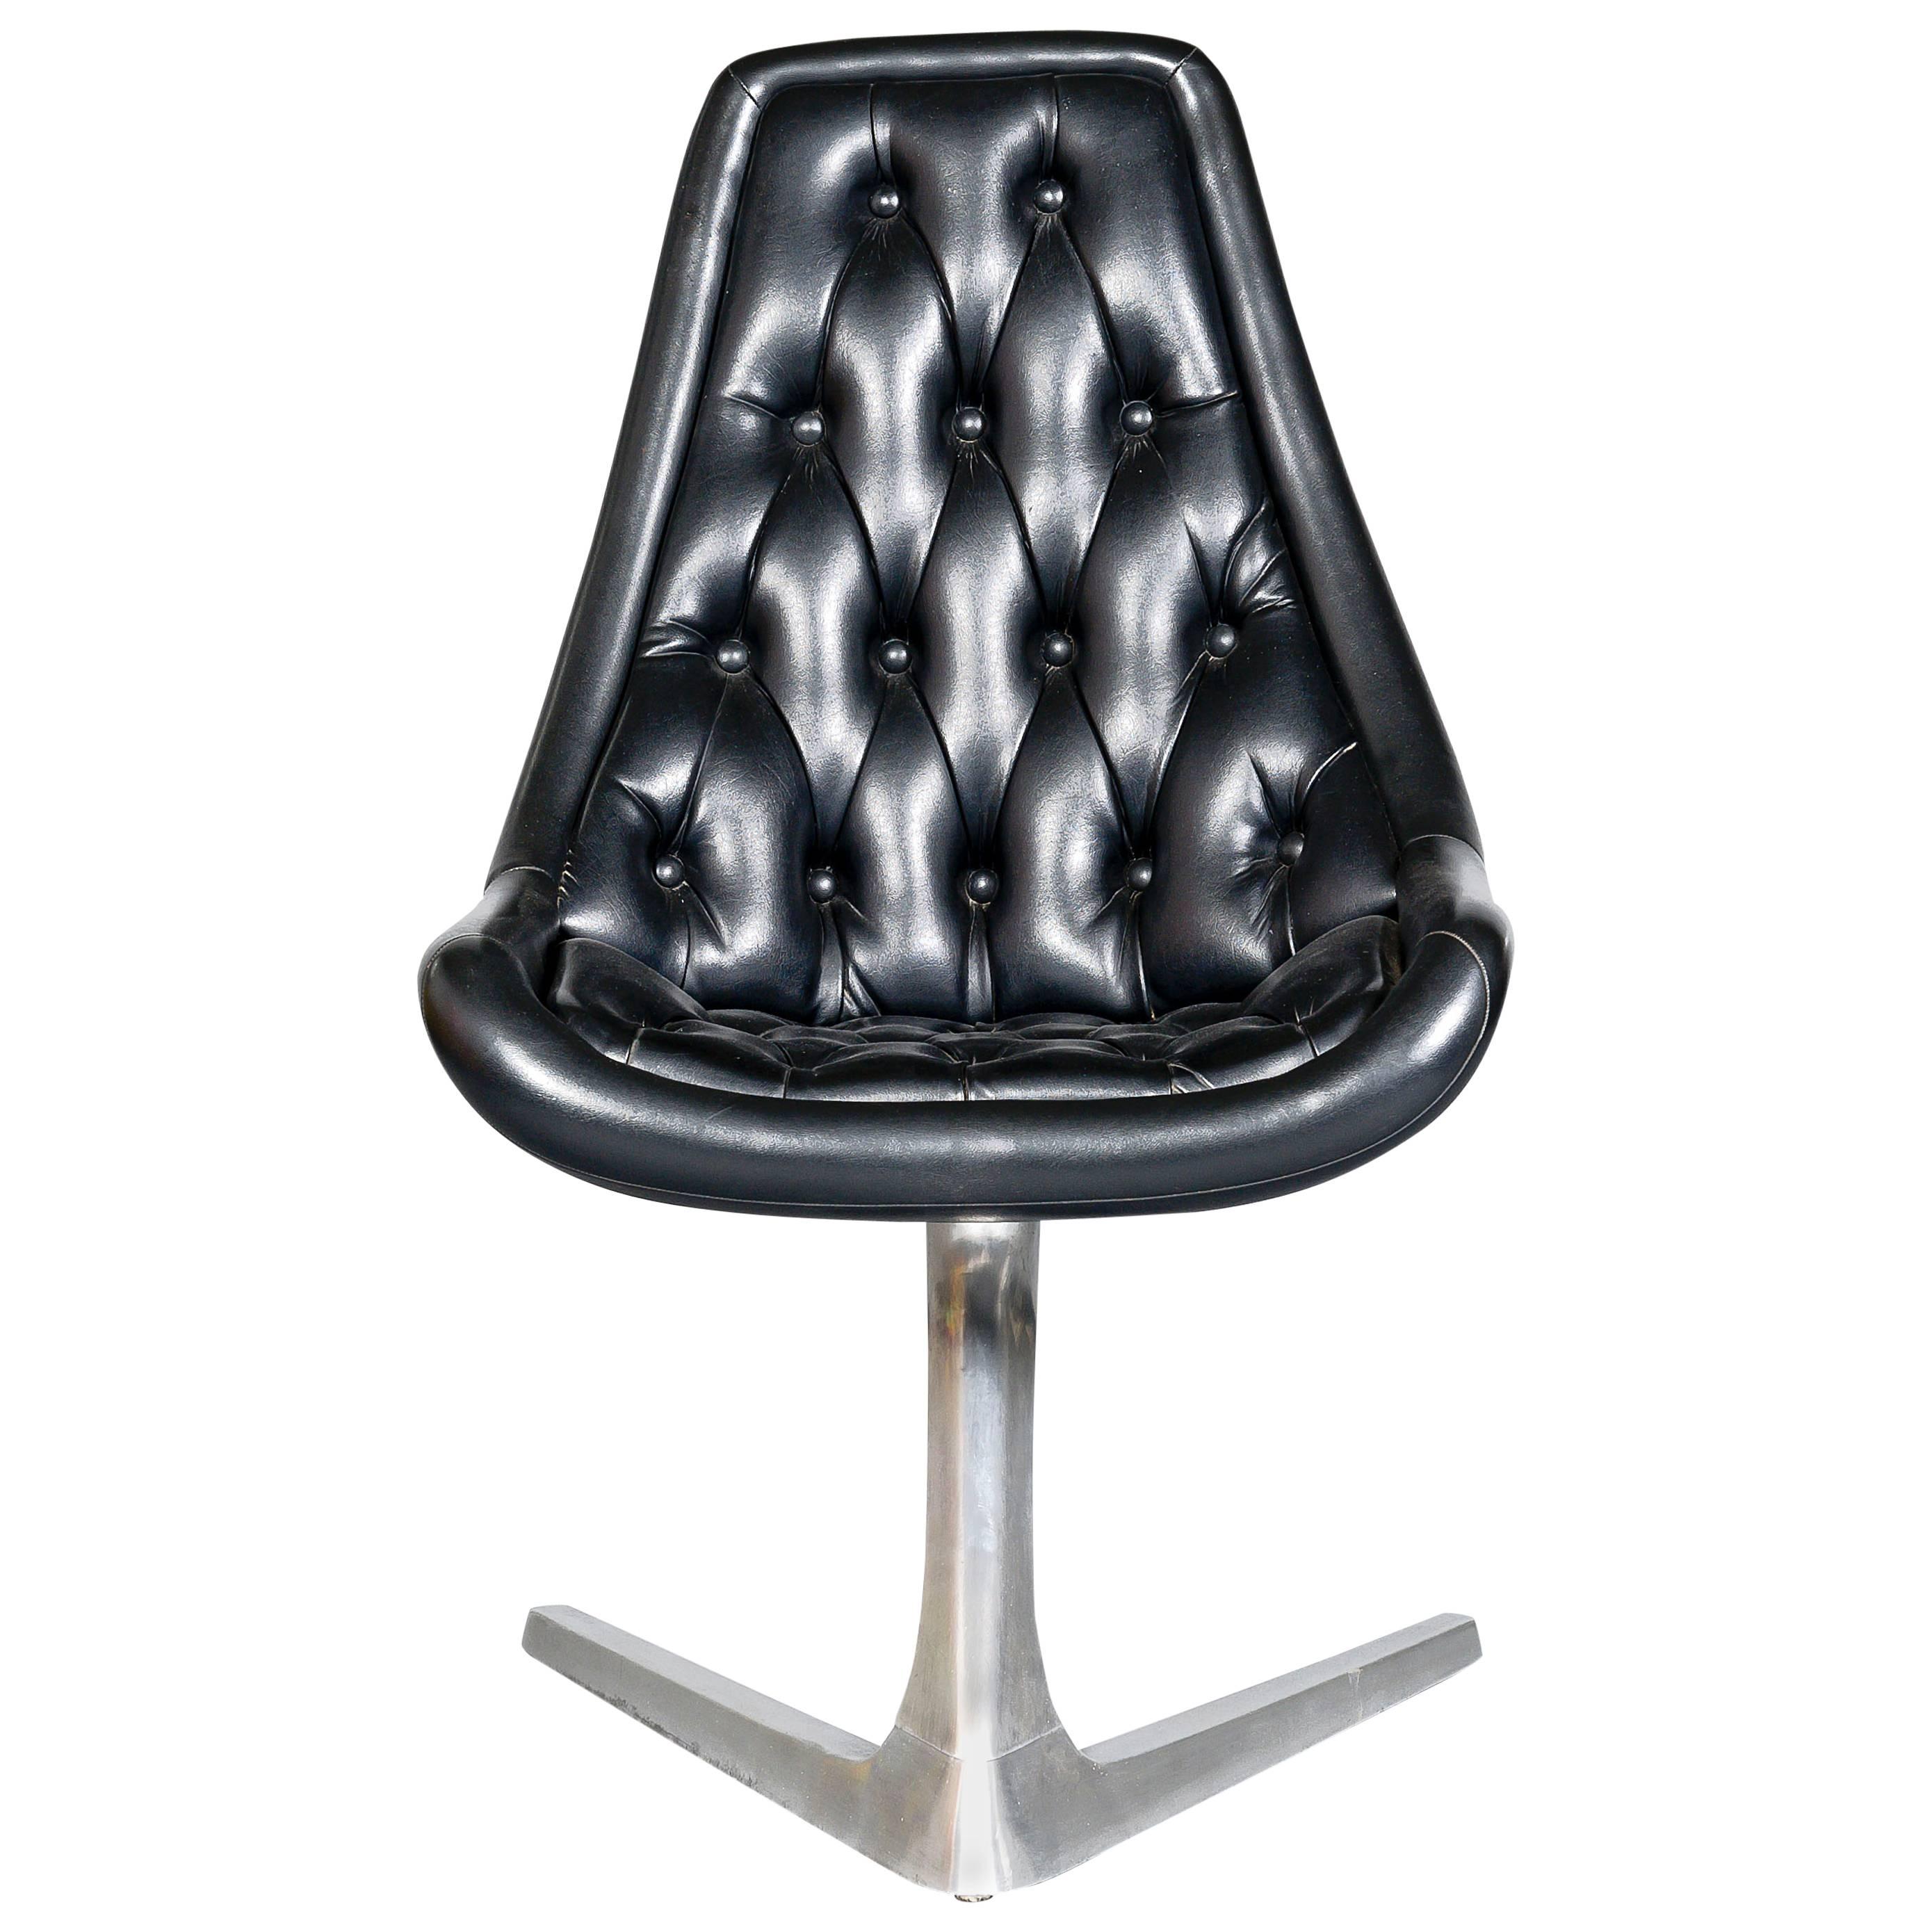 1960s Aluminium Chromcraft 'Sculpta' Chair Re-Upholstered in Black Leather For Sale